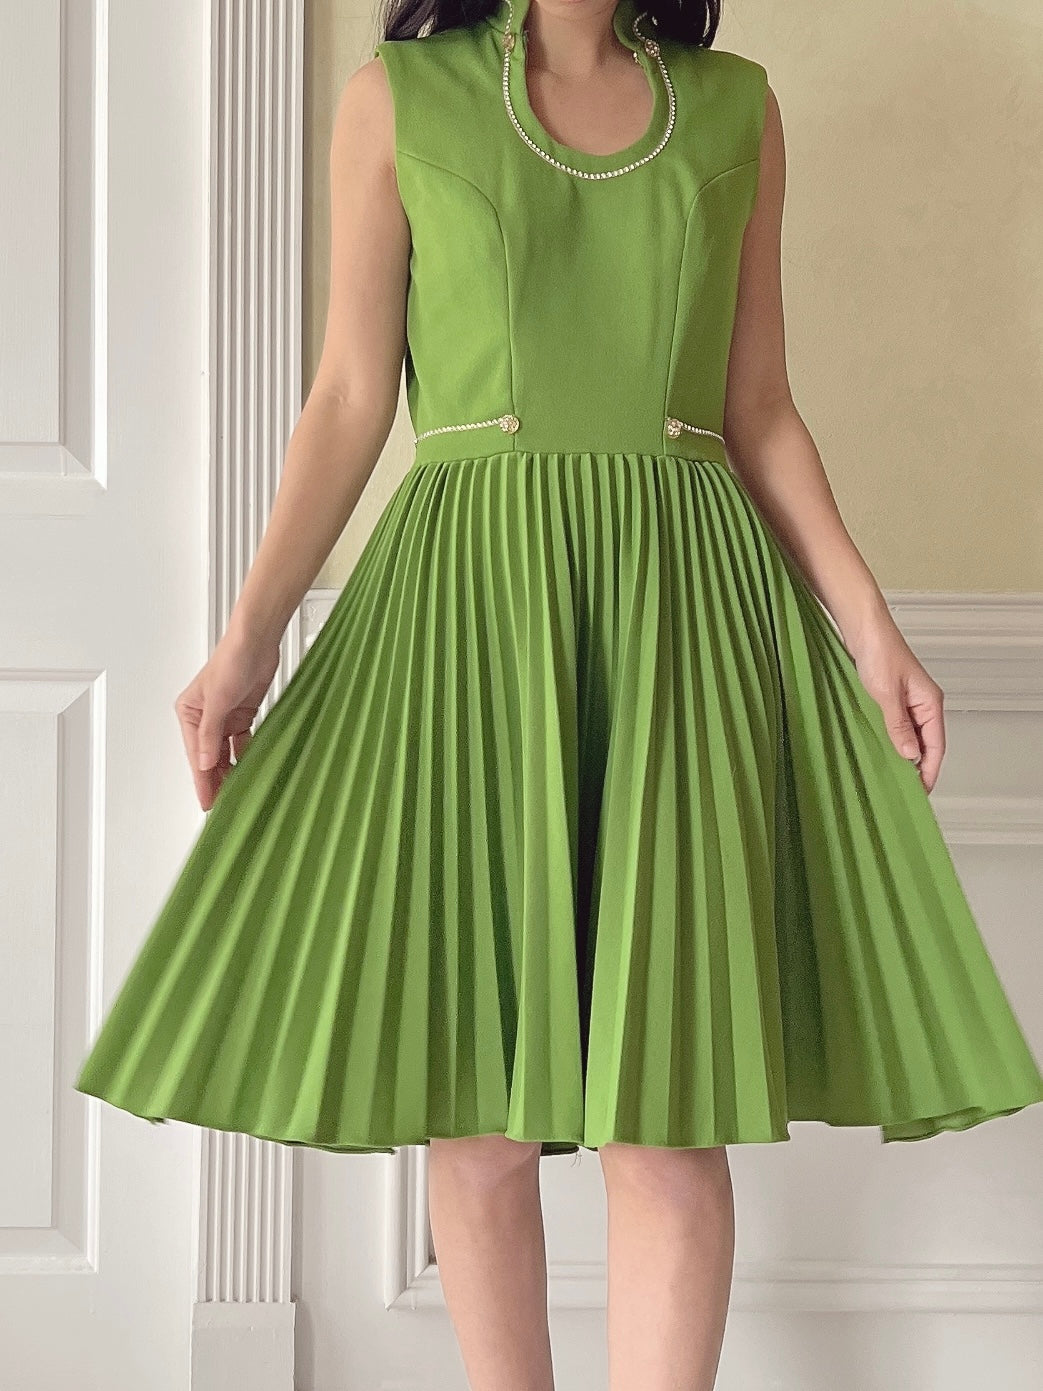 Vintage Green Rayon Pleated Dress - S